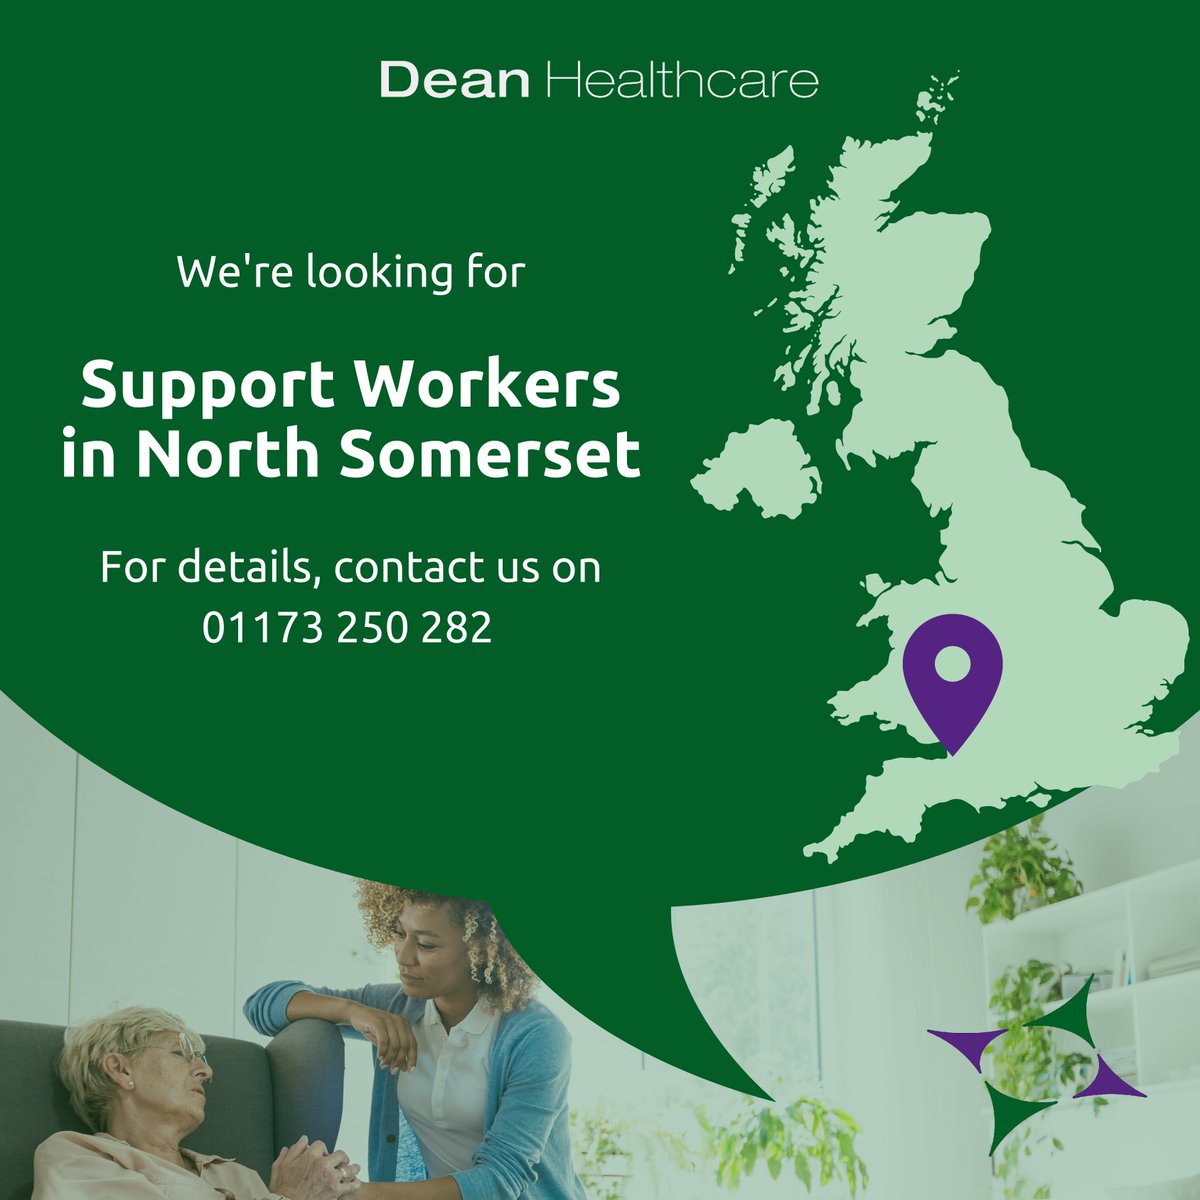 We're looking for Support Workers in North Somerset! If you have 6 months of UK care experience, we'd love to hear from you! Get in touch with our friendly team today on 01173 250 282

#healthcare #health #healthcareheroes #healthcareworkers #supportworkers #supportwork #somerset